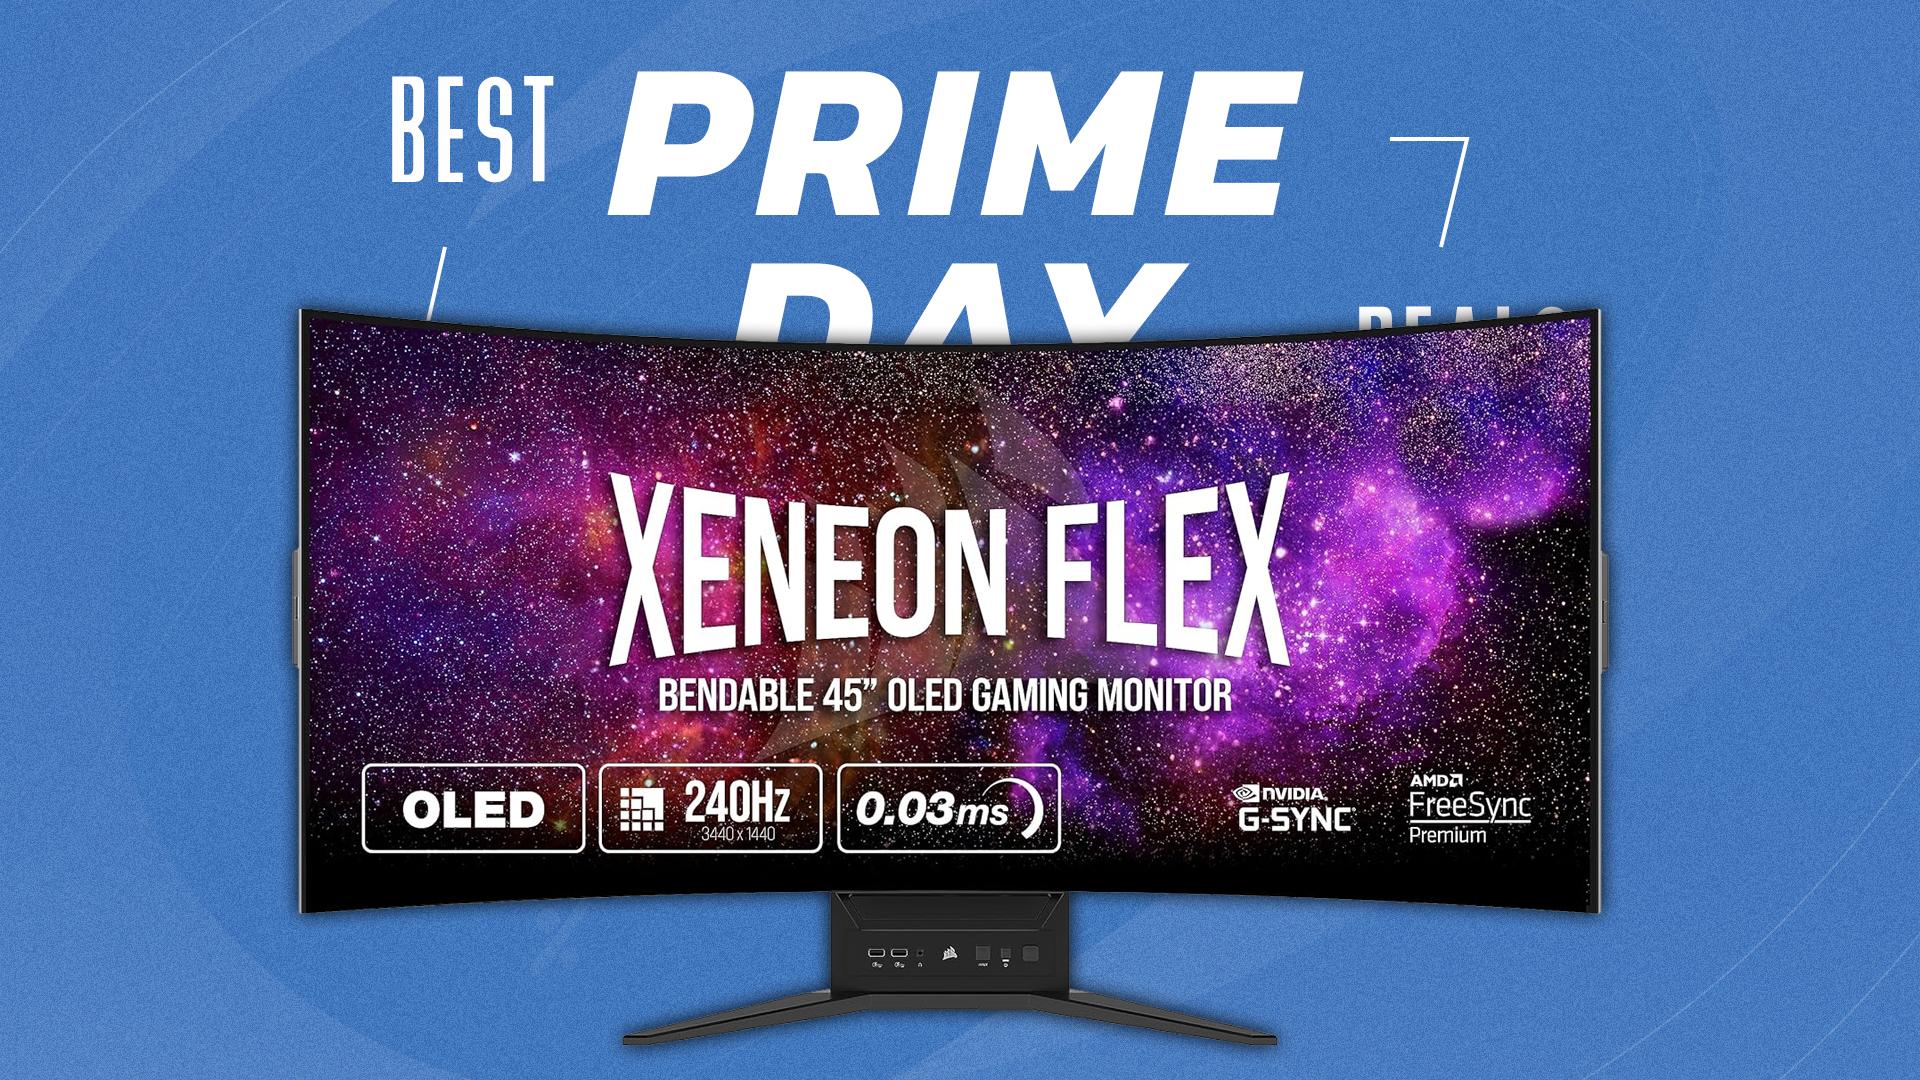 Xeneon Flex monitor from Corsair on top of standard thumbnail saying best prime day sales on a blue background